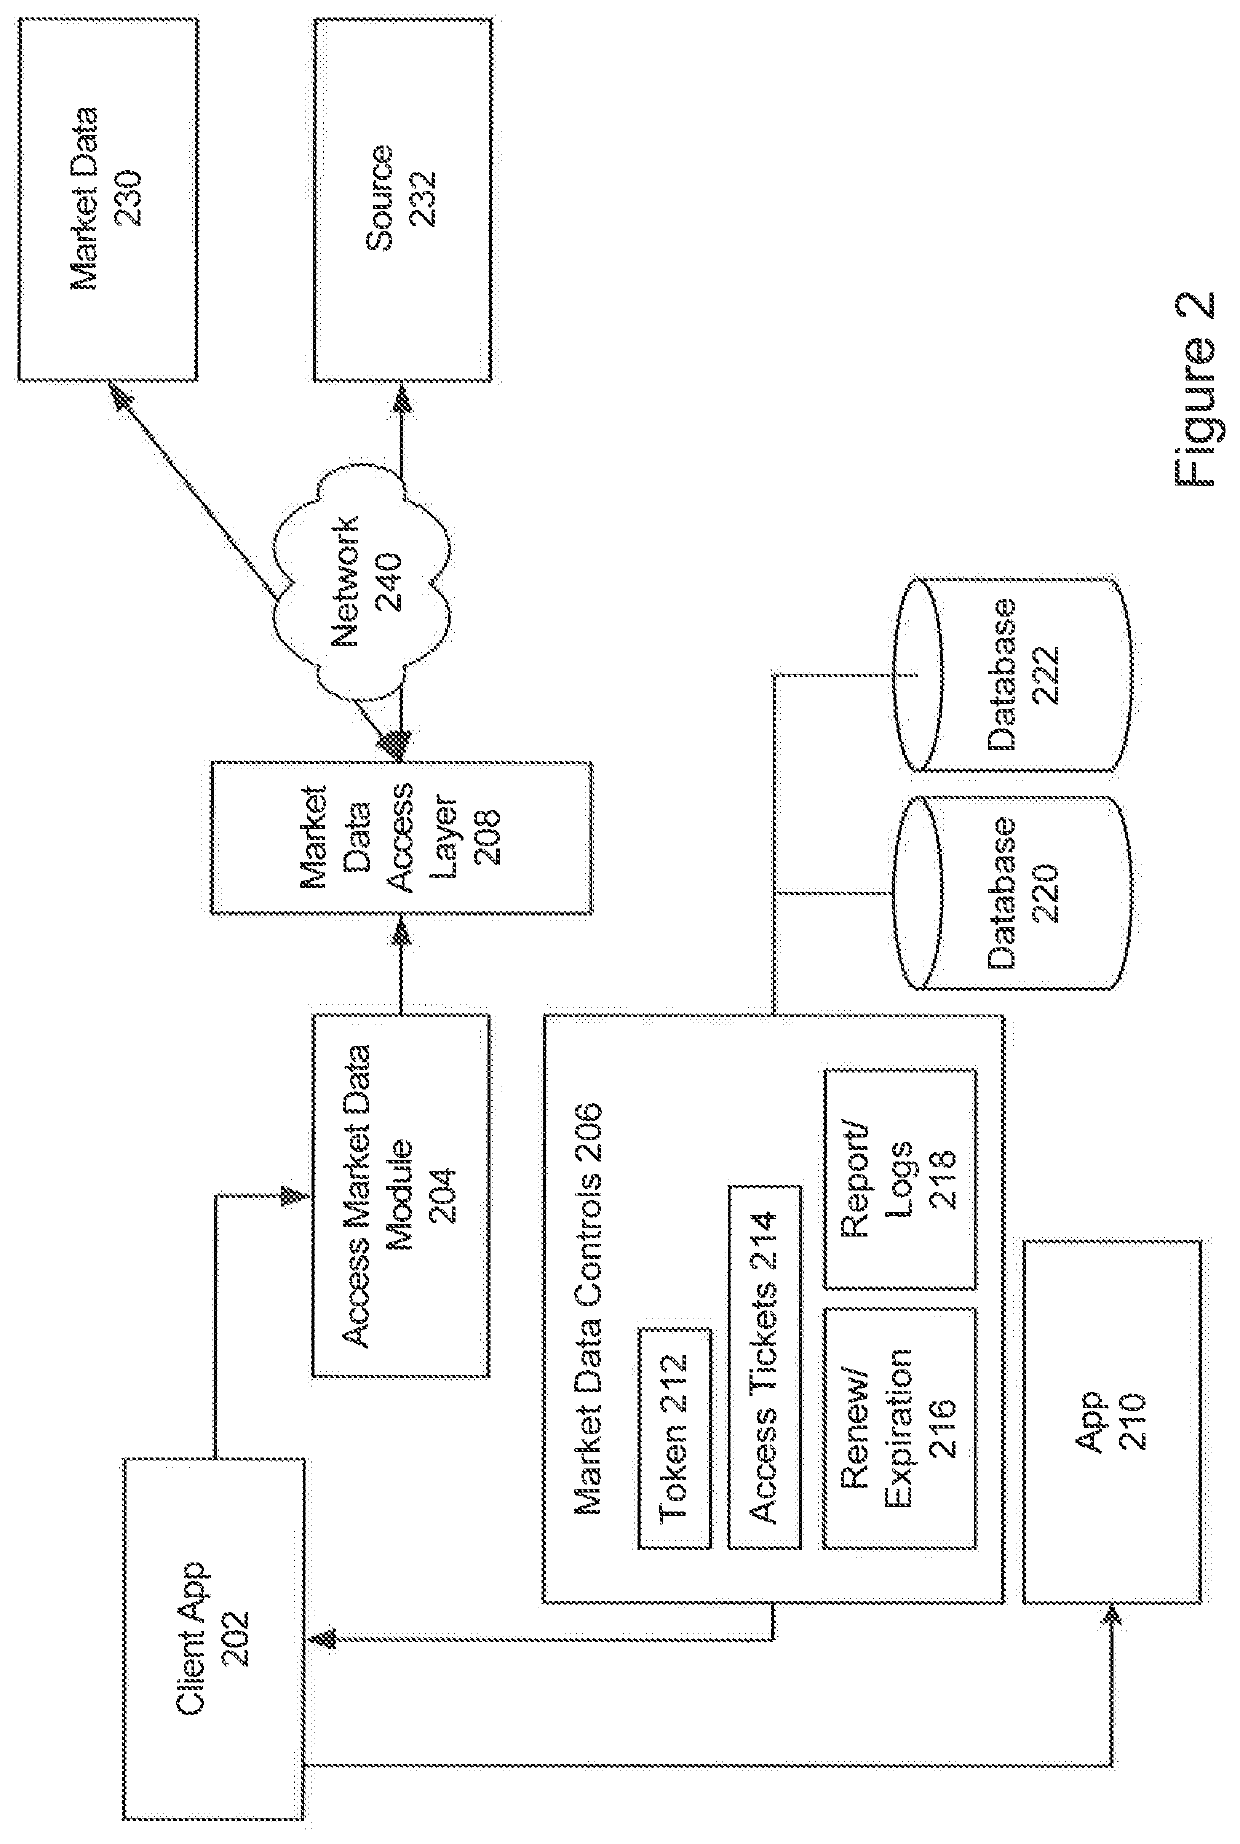 System and method for implementing market data rights enforcement